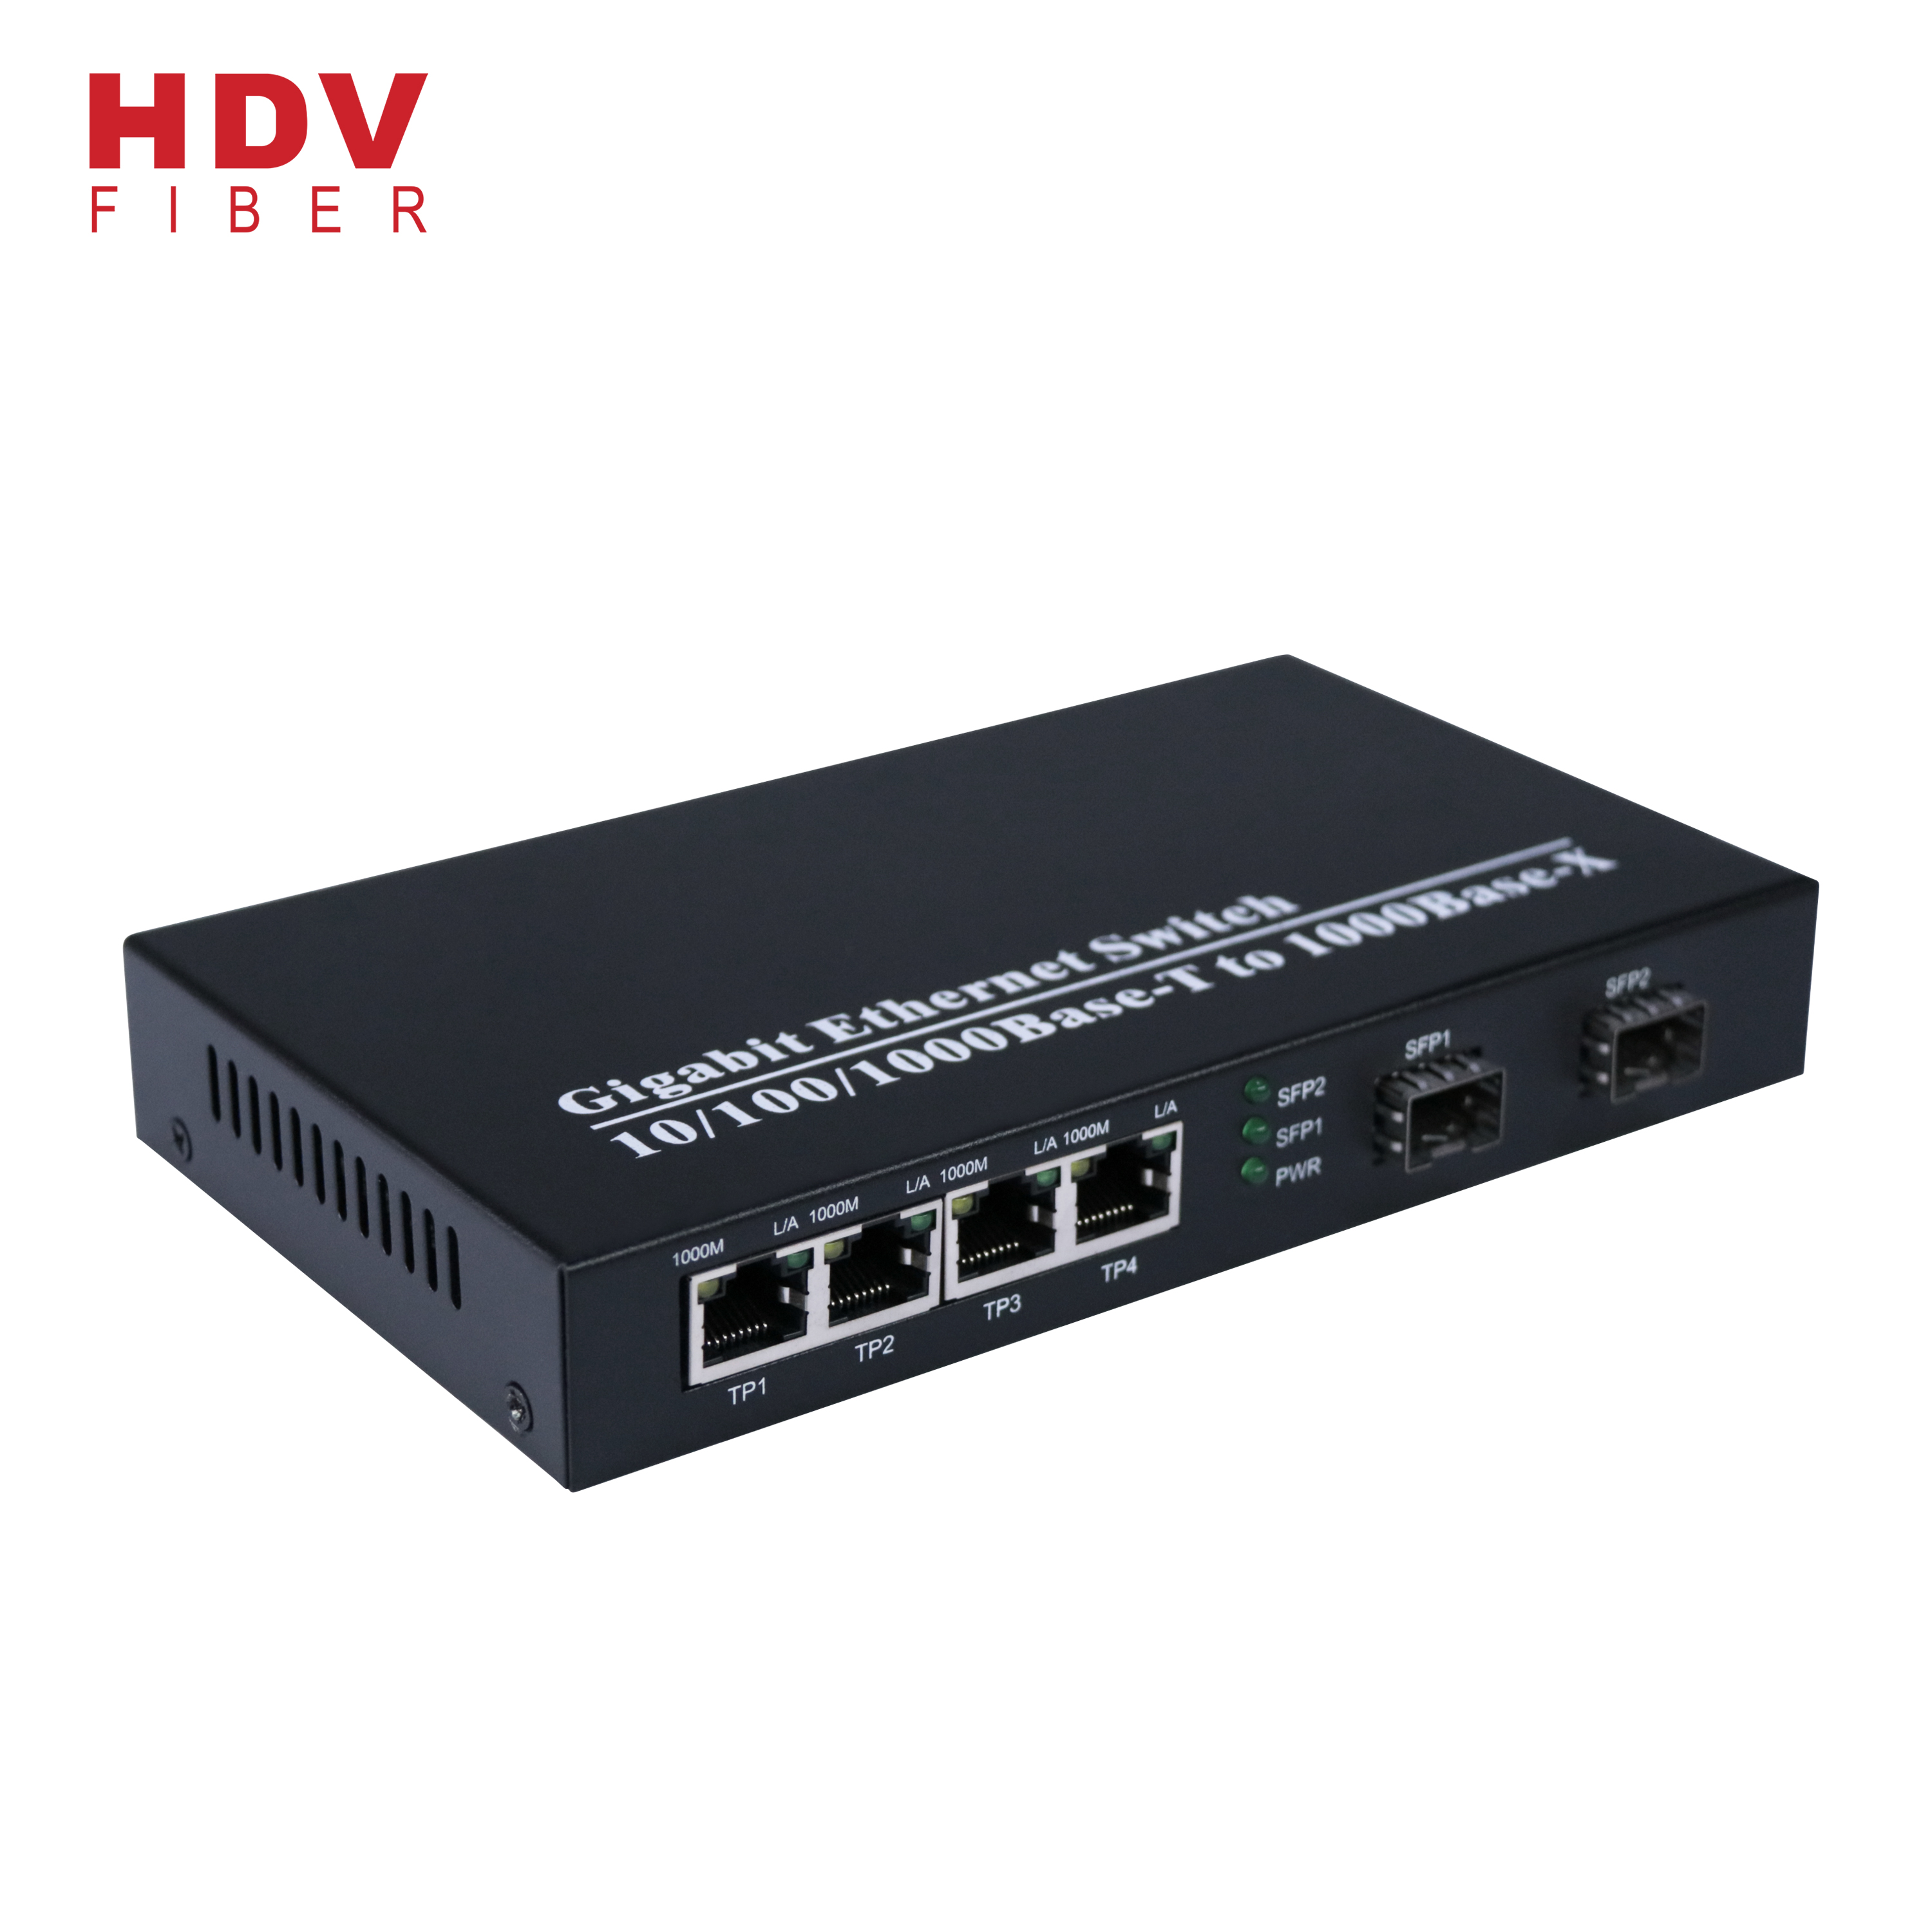 China Managed Industrial Ethernet Switch - 4 Port Gigabit Ethernet Switch  and 2 SFP Ports 1000M fiber optic transceiver switch – HDV Manufacturer and  Supplier